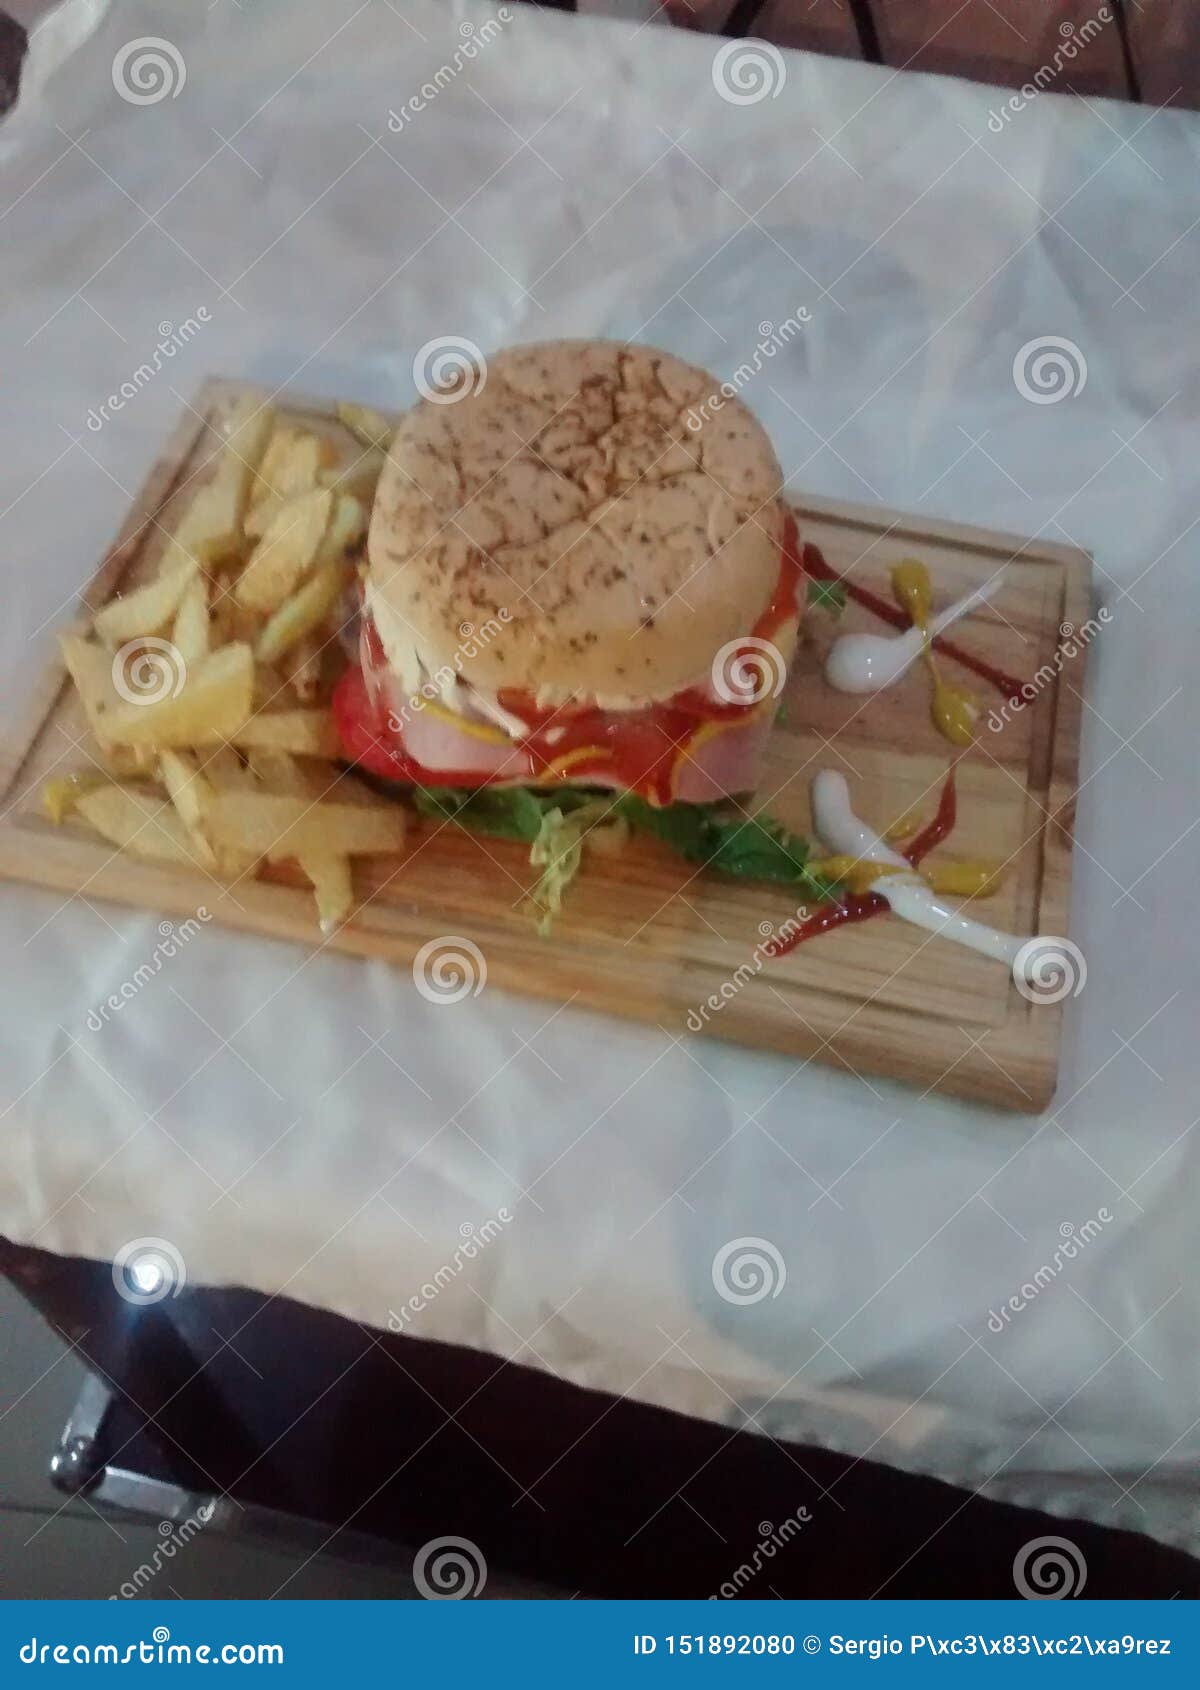 hamburger on wooden table with fried potatoes and sauces of various colors and flavors is a fast or chatarra food